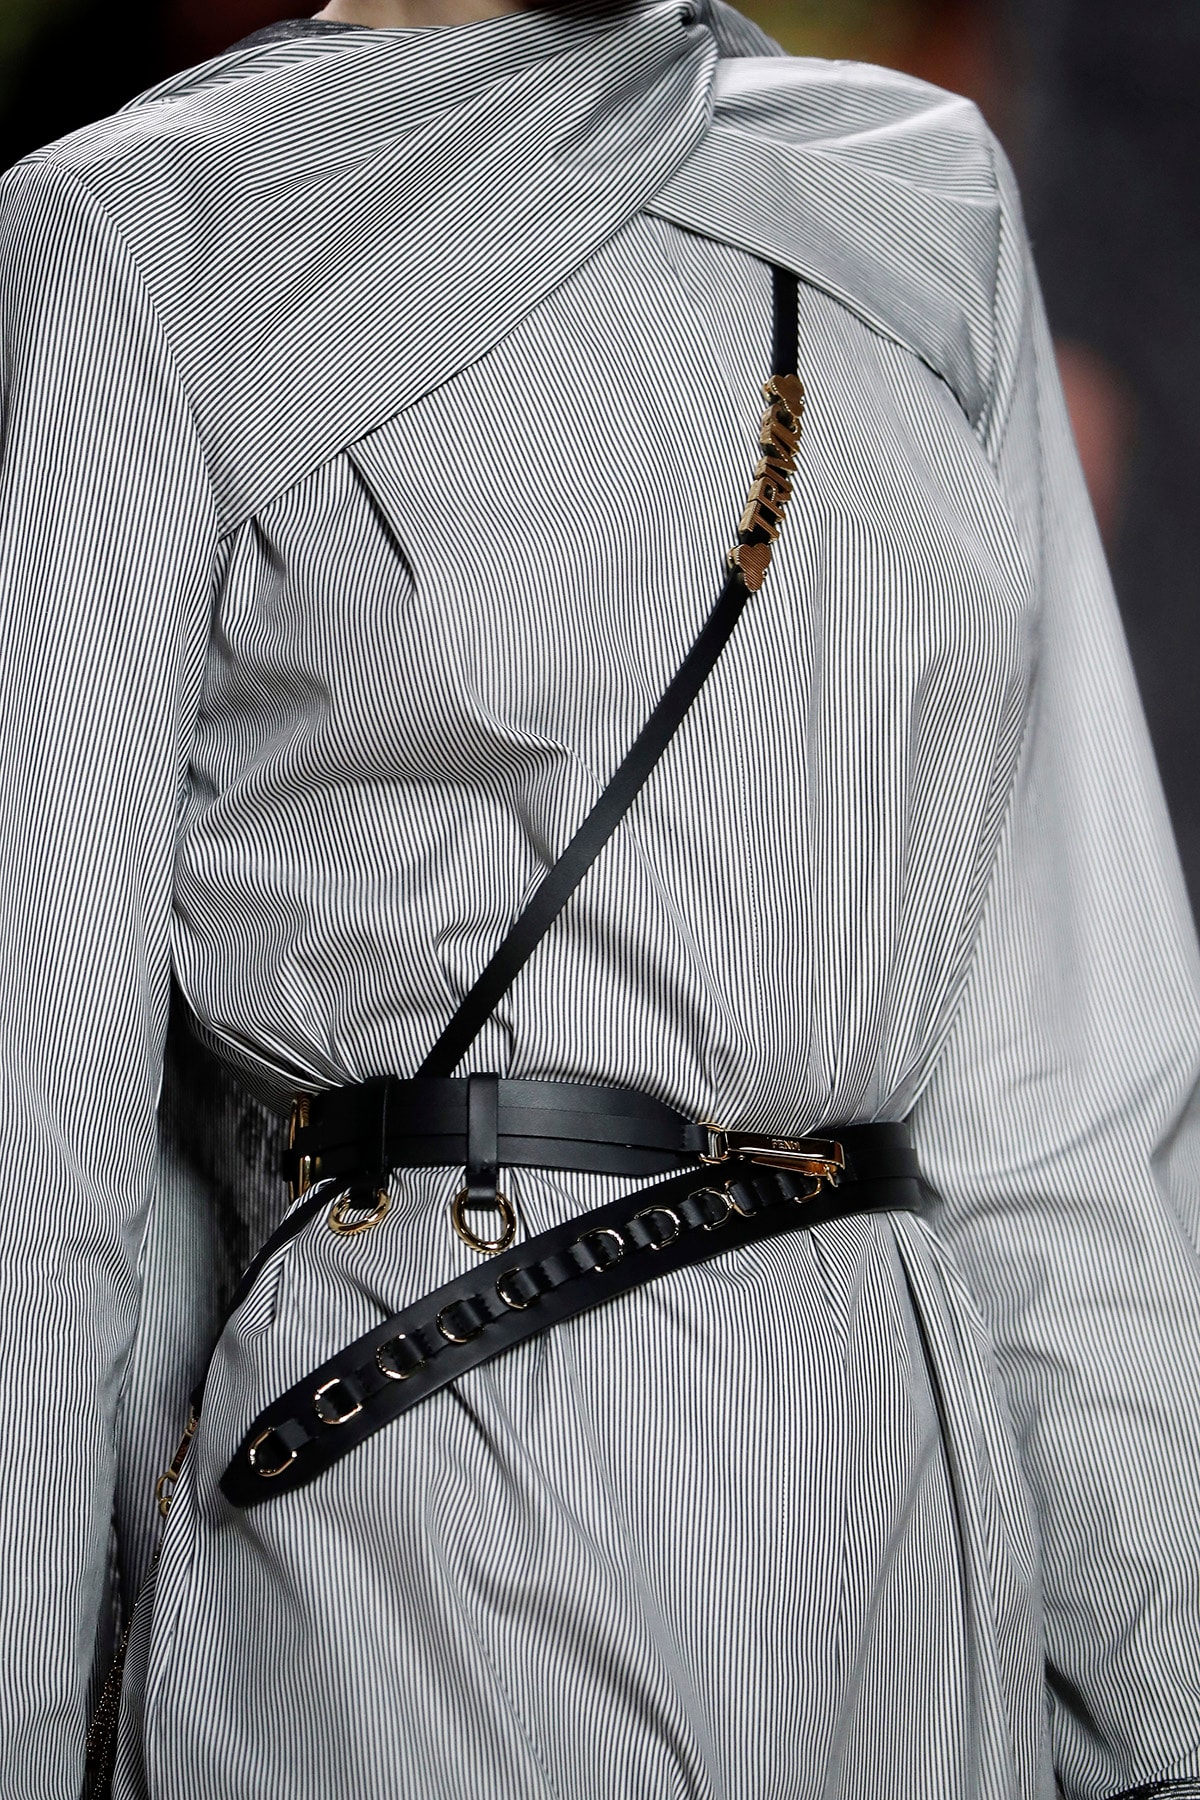 Fendi Fall/Winter 2020 Collection Bags Accessories Chaos Harness Belt